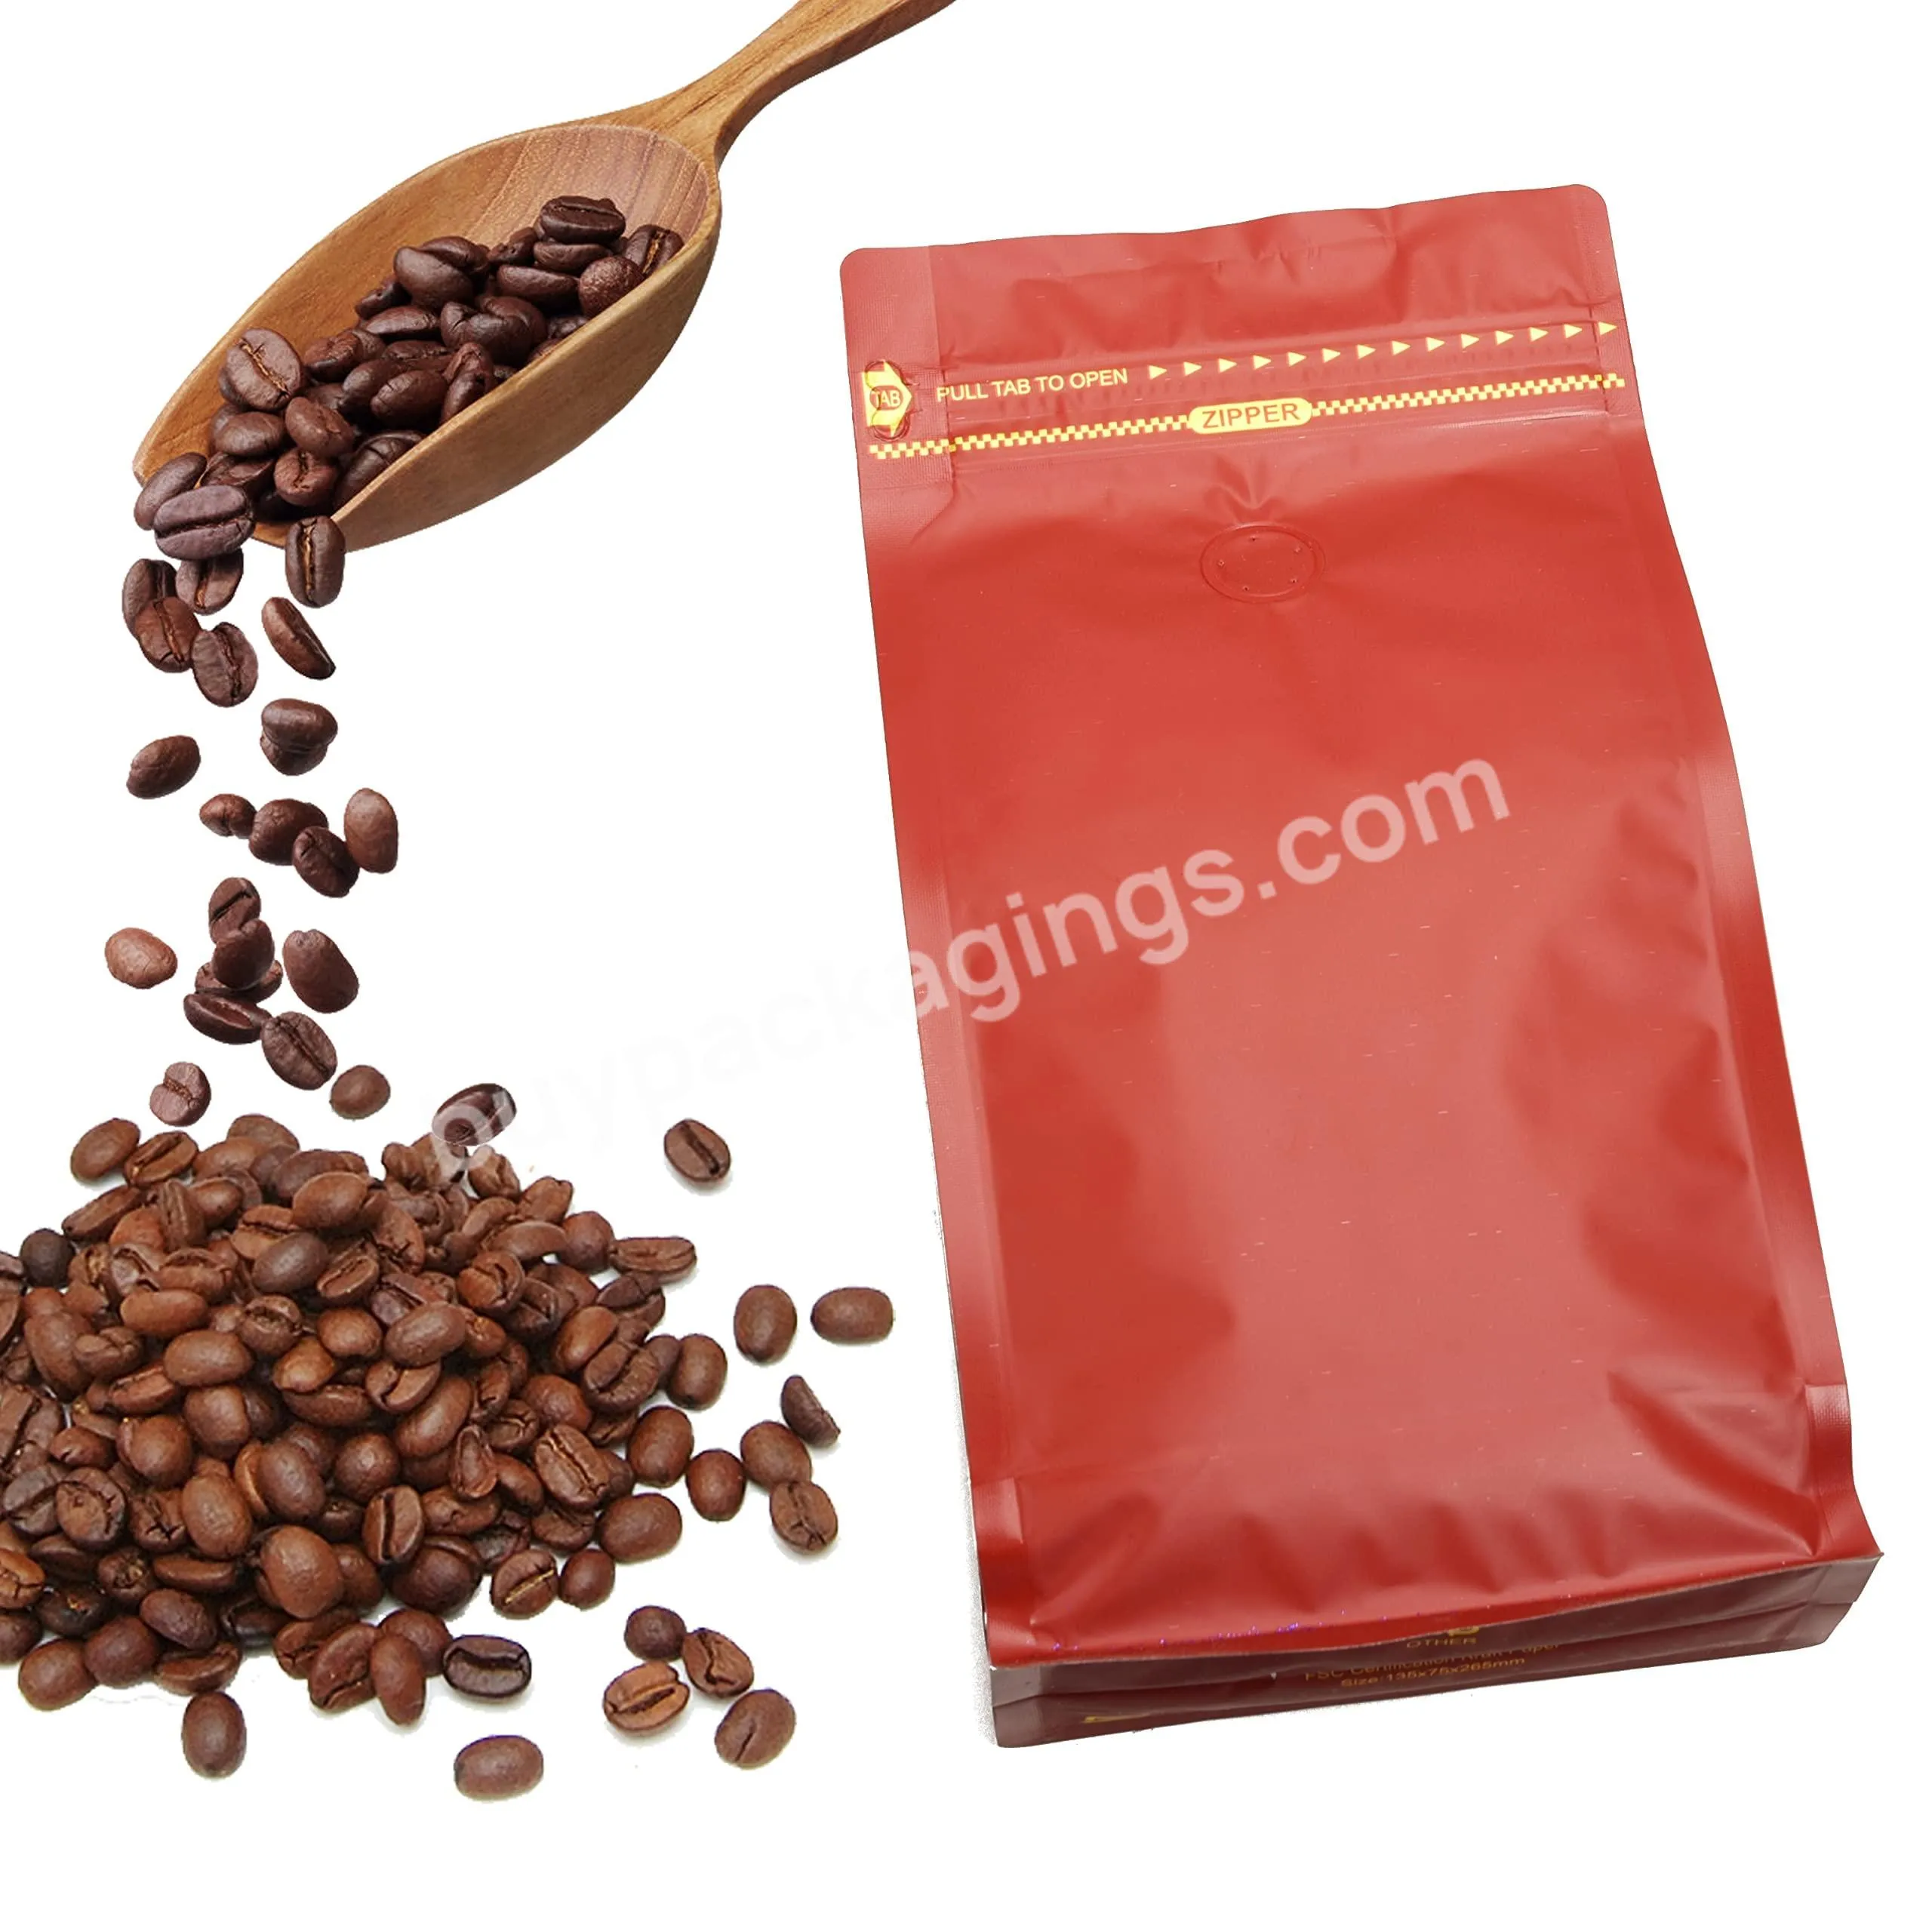 Stand Up Block Bottom Side Gusseted Coffee Pouches Bags With One Way Degassing Valve And Reusable Side Zipper